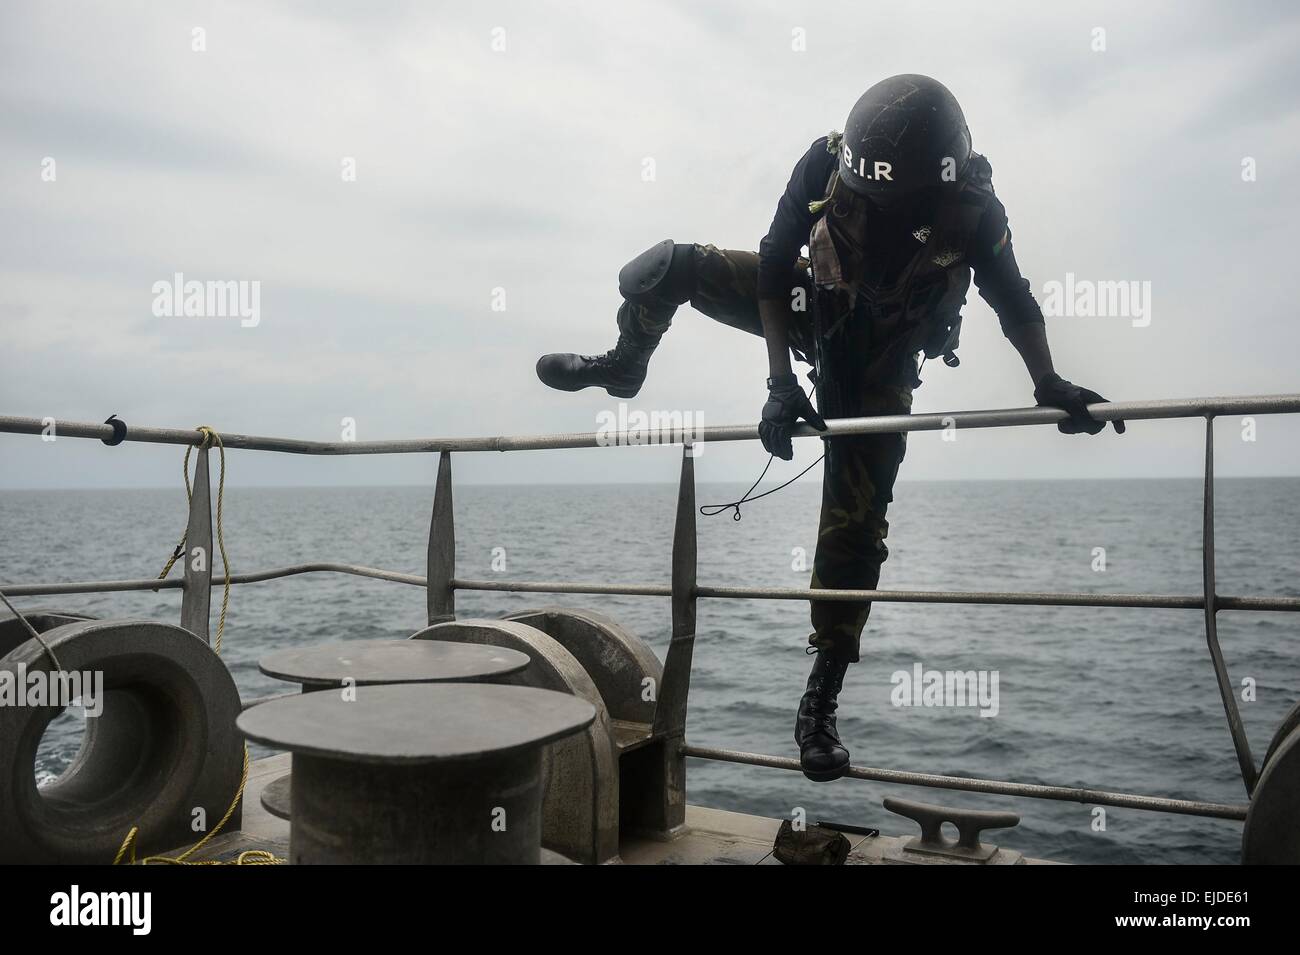 A Cameroonian Rapid Intervention Battalion special operations commando climbs over the rail of the Military Sealift Command's joint high-speed vessel USNS Spearhead during a visit, board, search and seizure drill  as part of Obangame Express March 22, 2015 in the Gulf of Guinea. Stock Photo